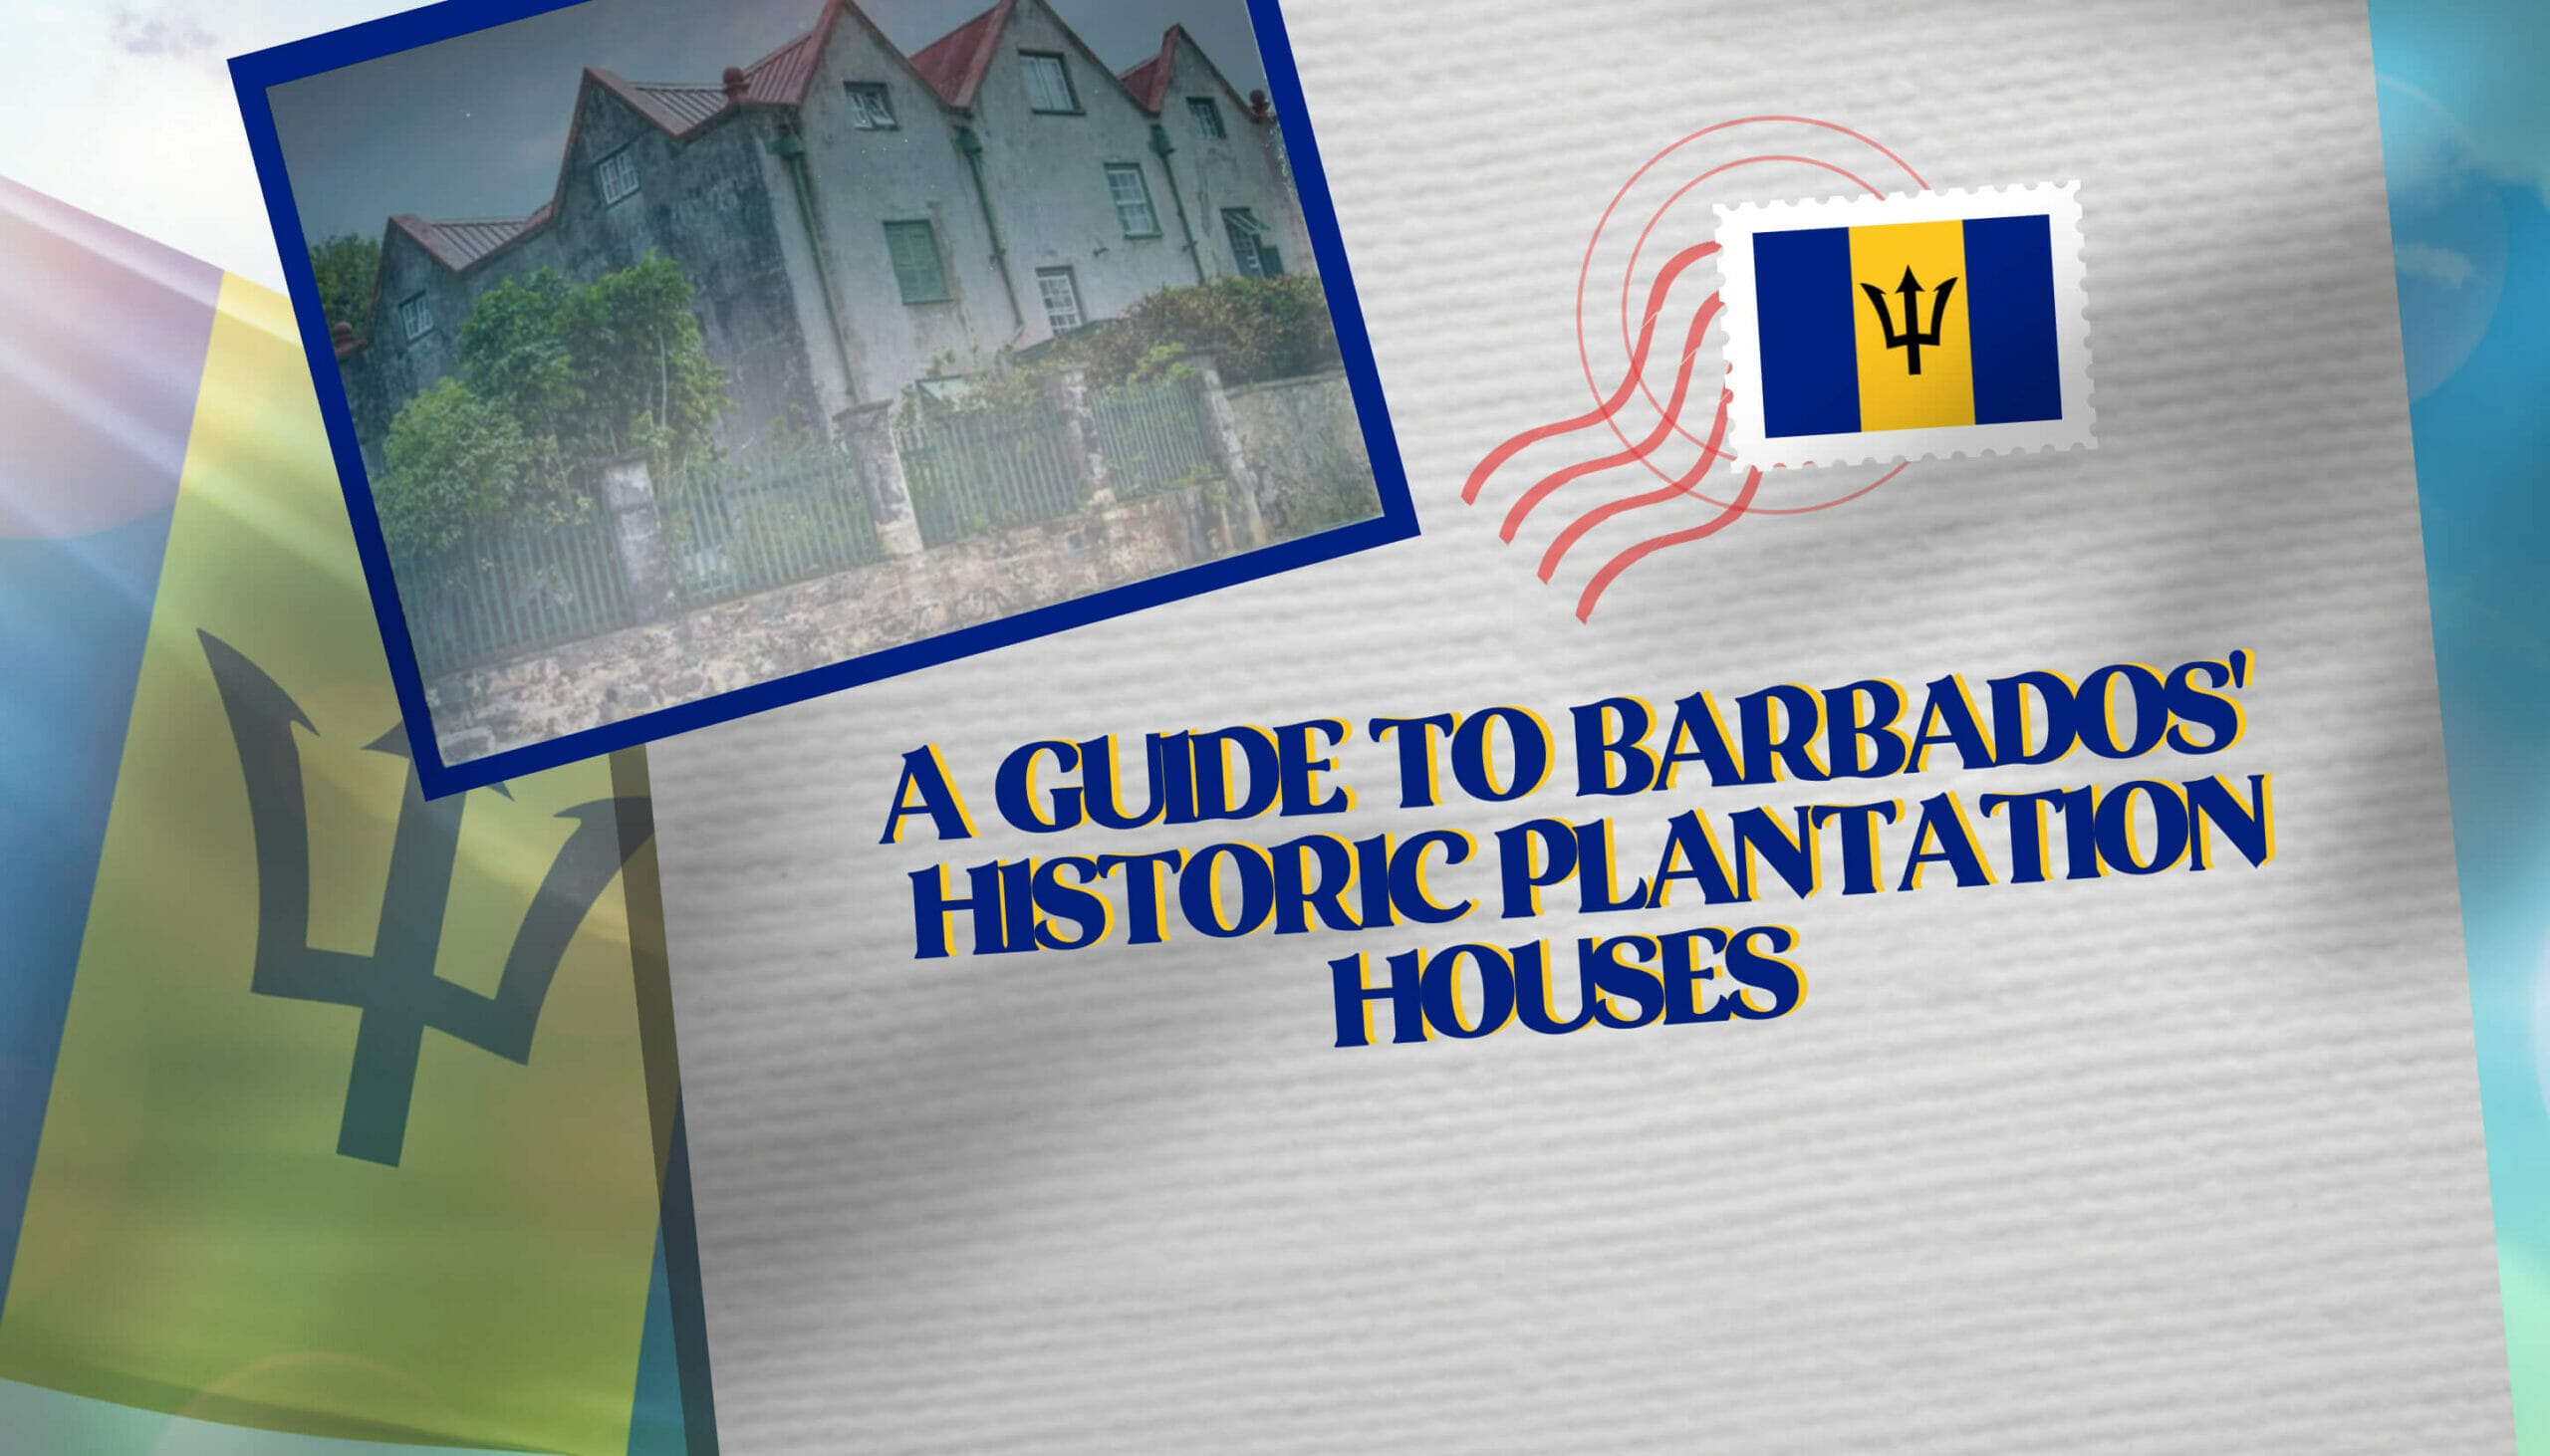 A Guide to Barbados' Historic Plantation Houses